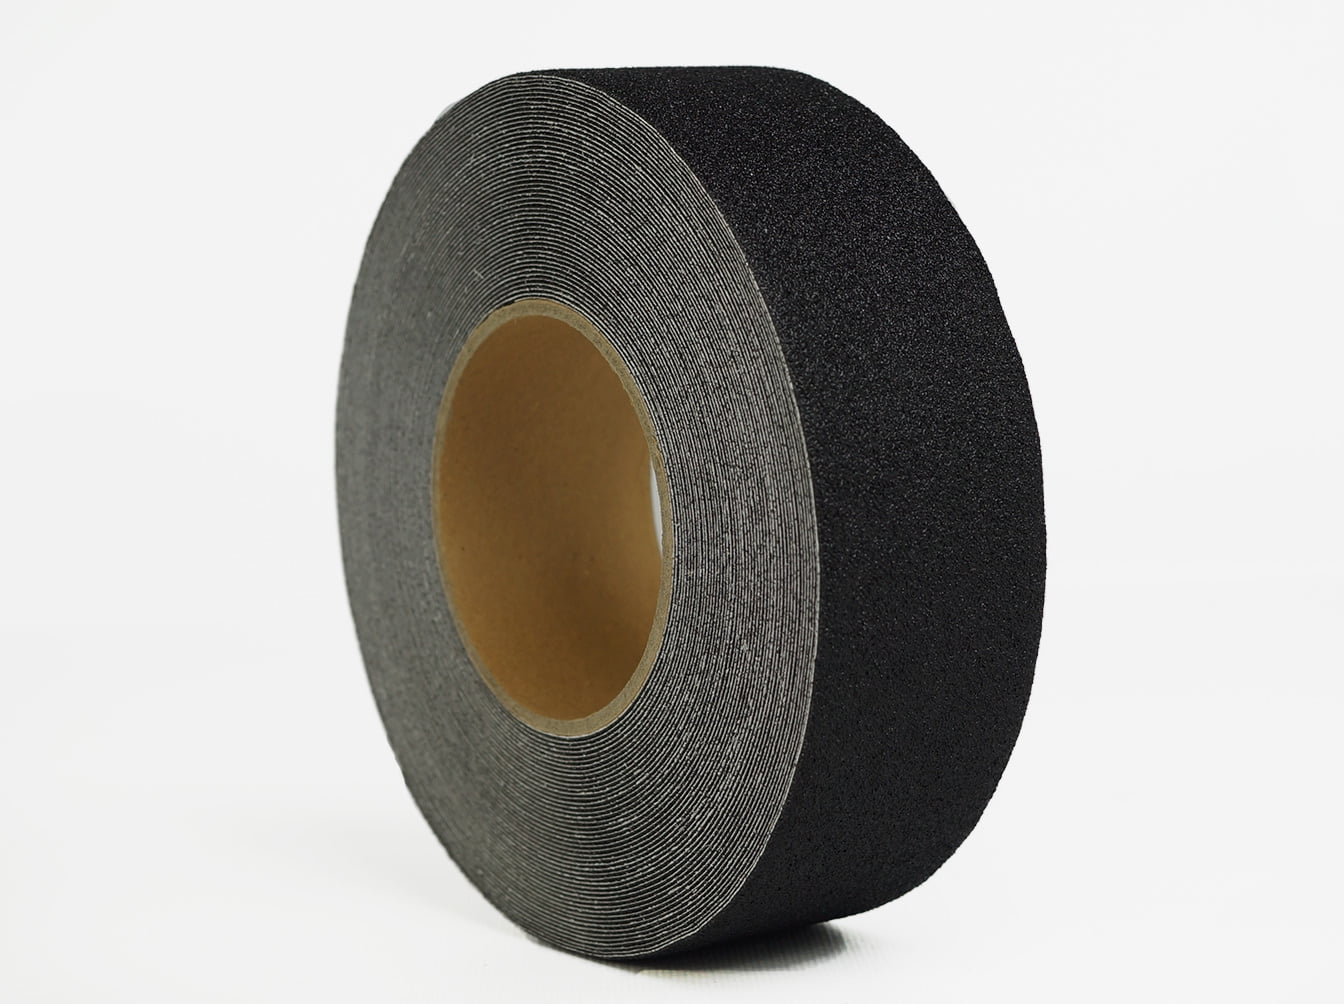 60 Grit Non Skid Tape 2" X 60 FT Adhesive Green Anti Slip Traction Safety 